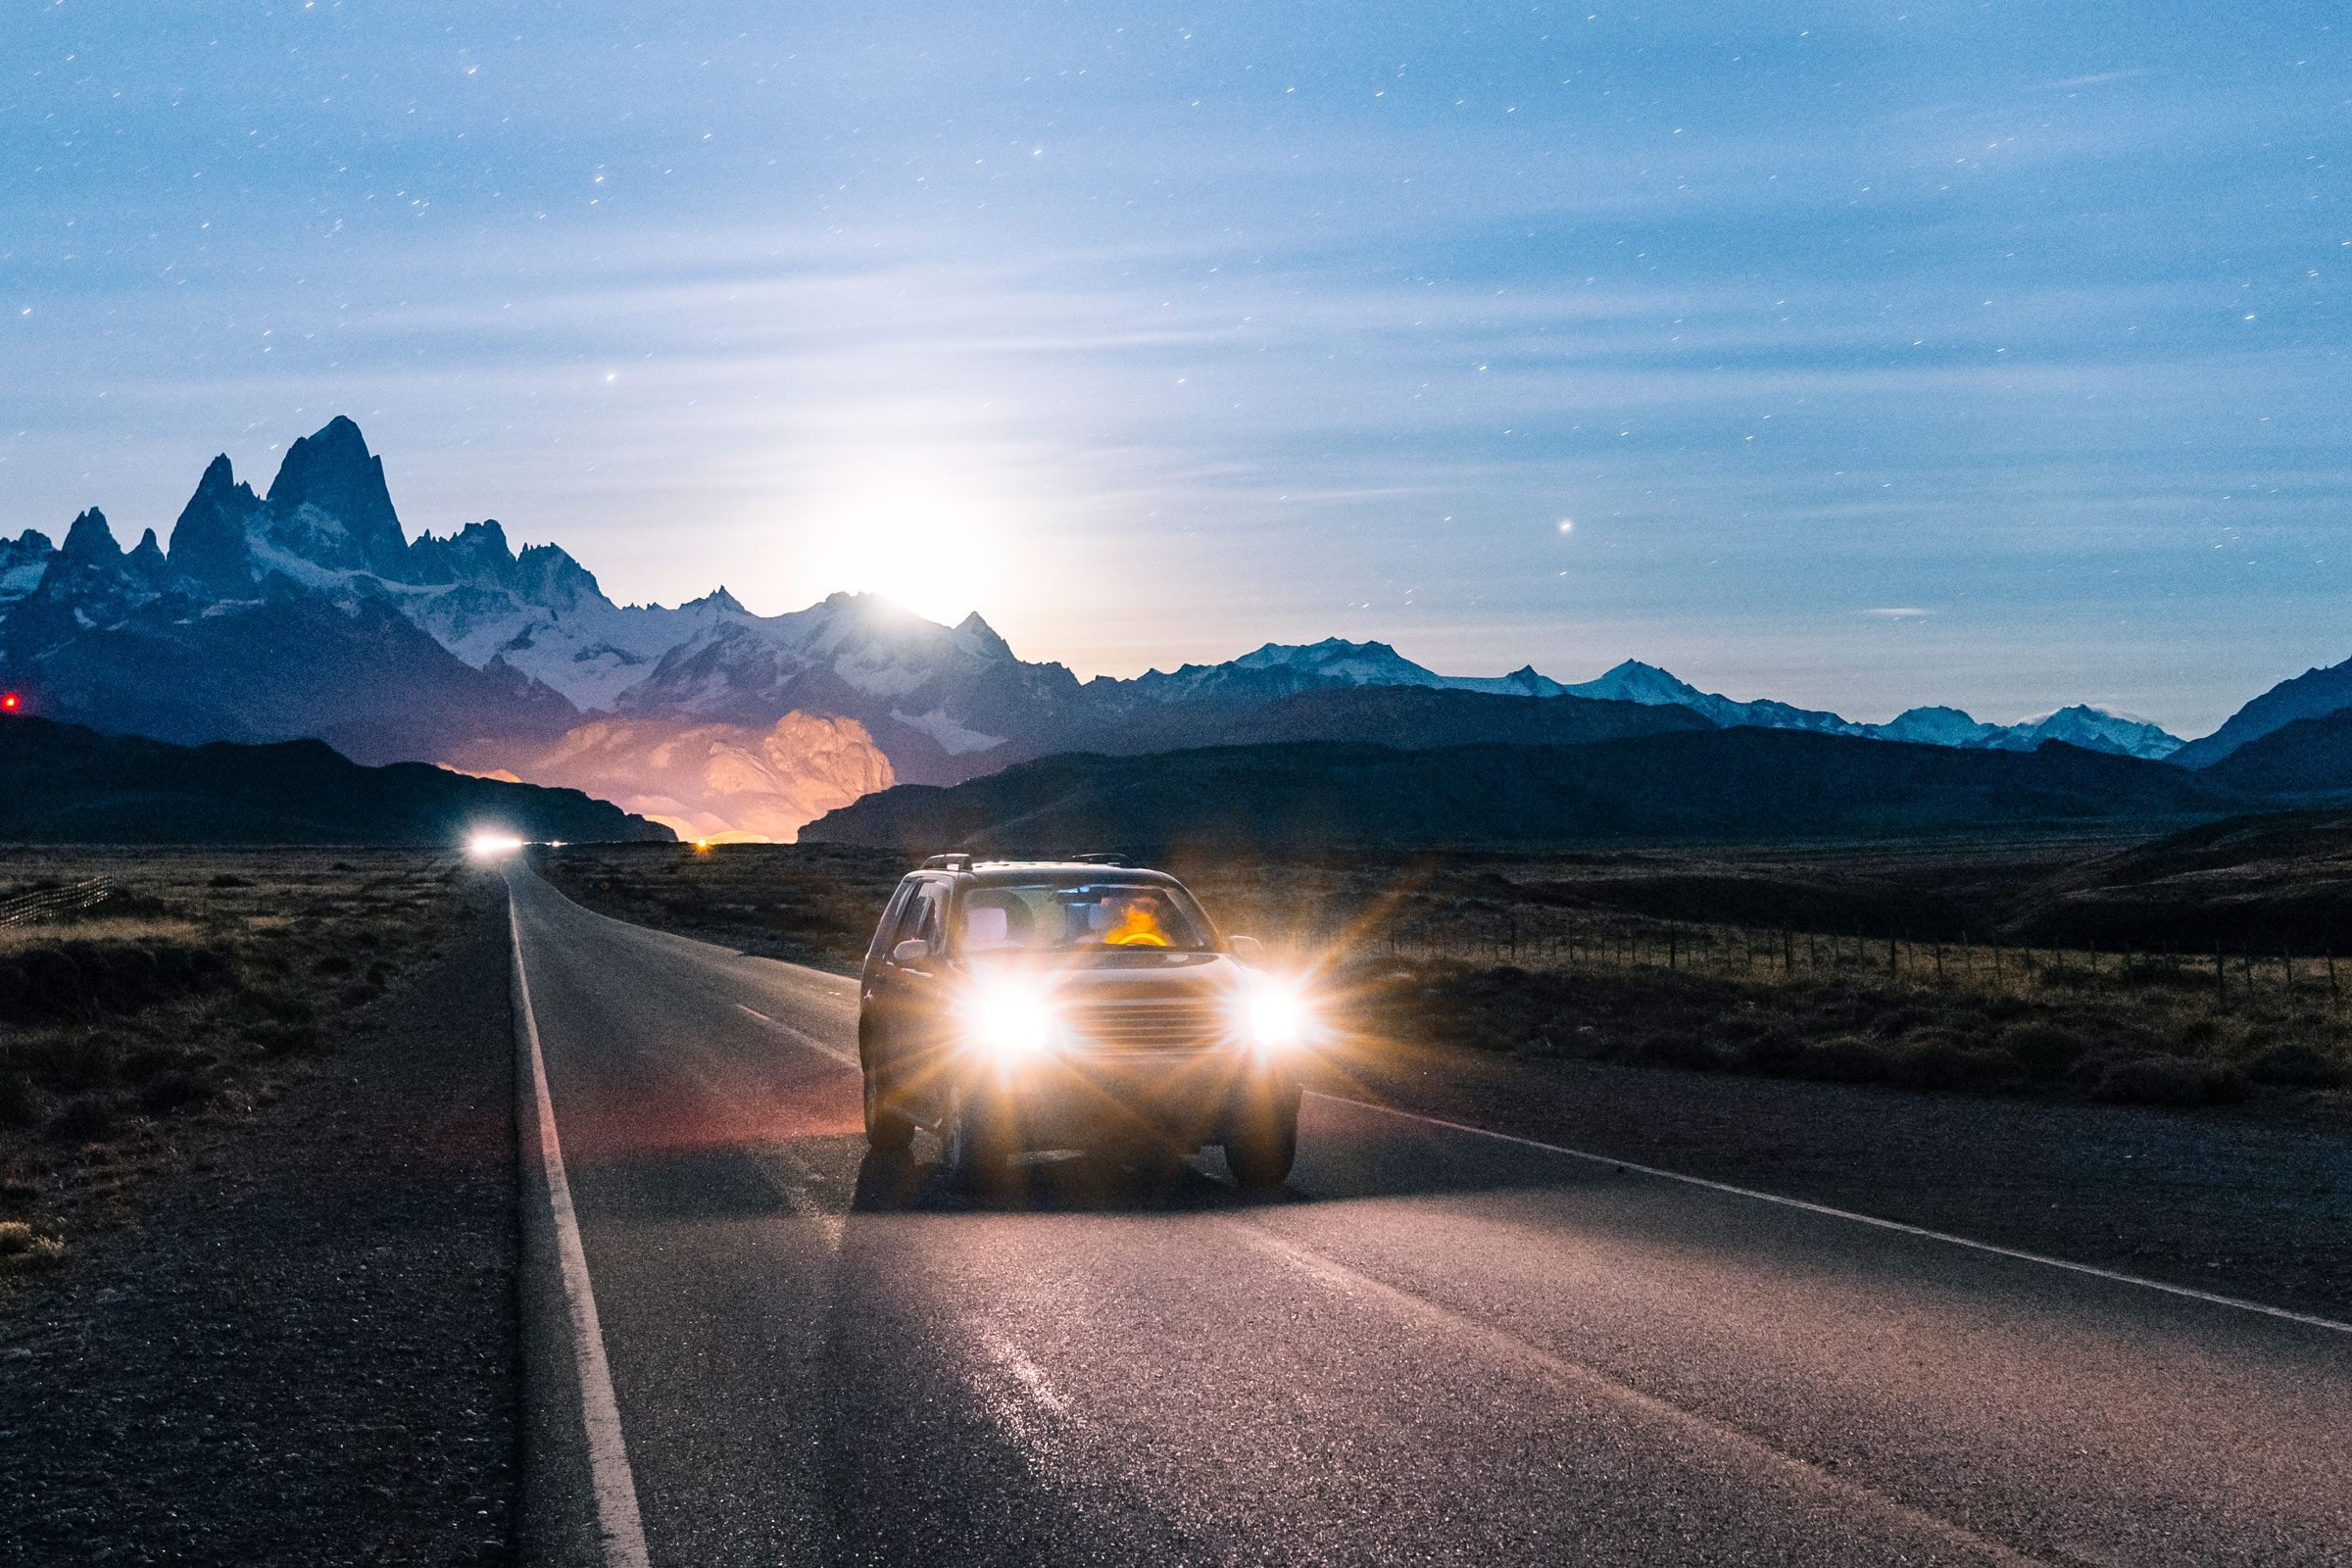 When should you avoid using your high-beam headlights?